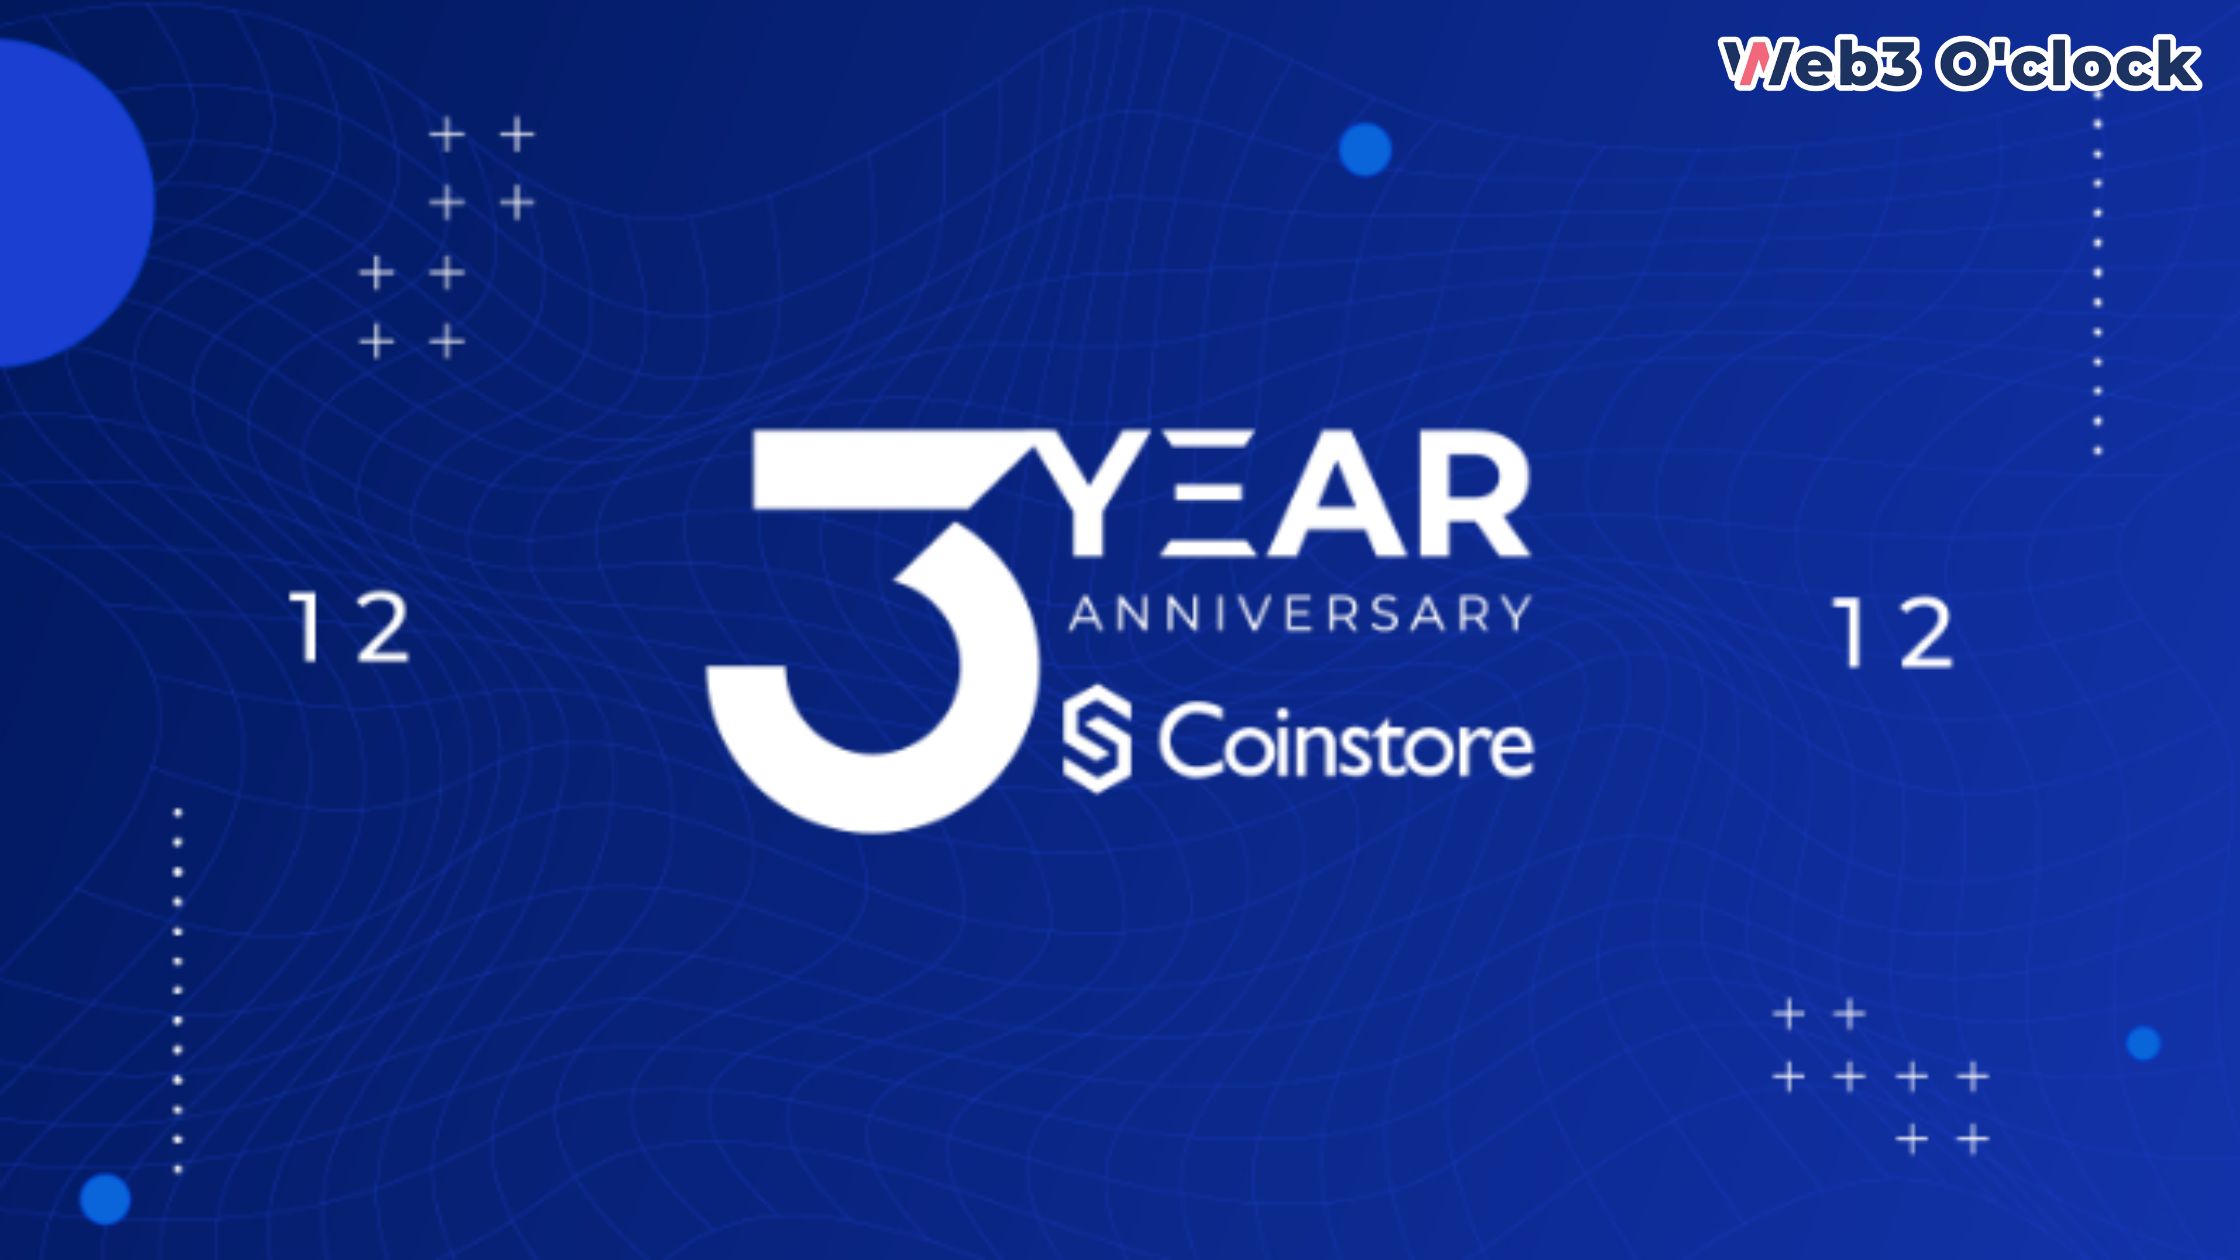 Coinstore 3 Years by Web3 O'clock